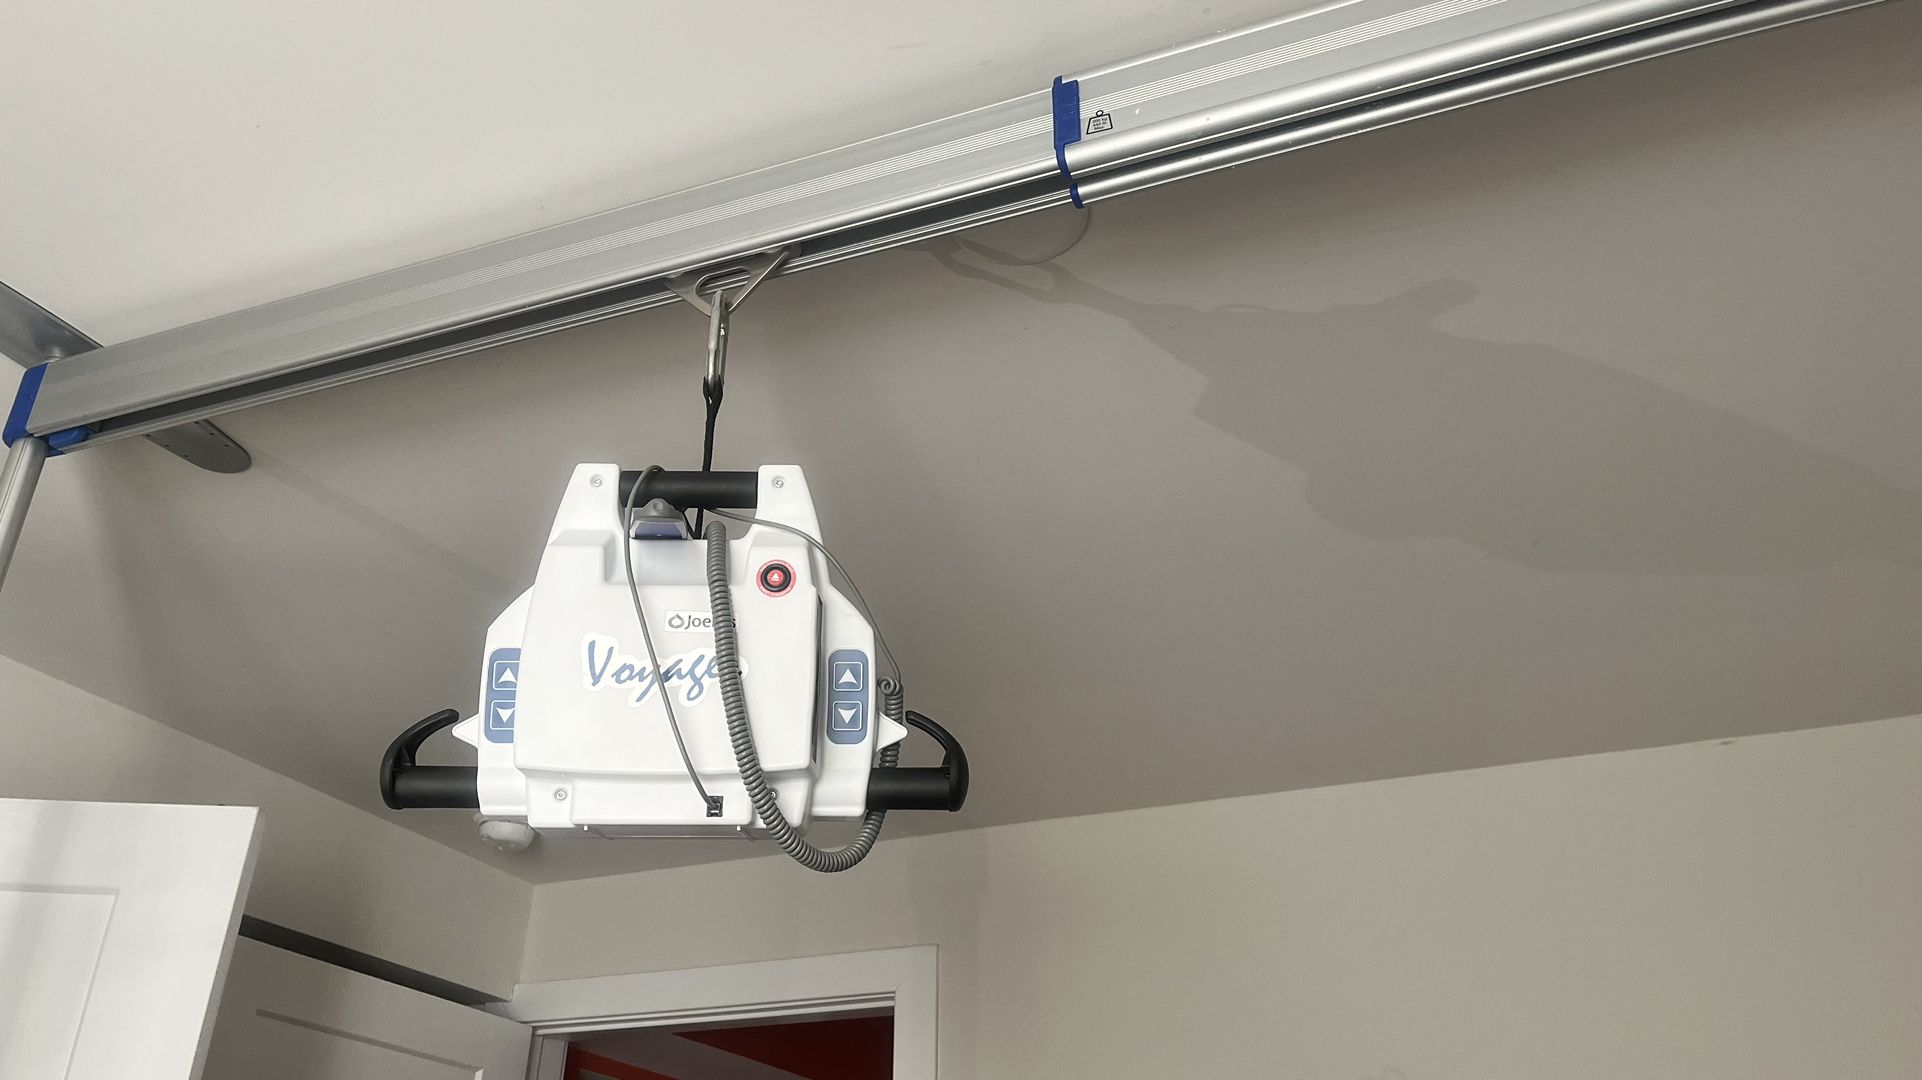 Voyager Easy track Portable Ceiling Lift/motor Mobility Patient